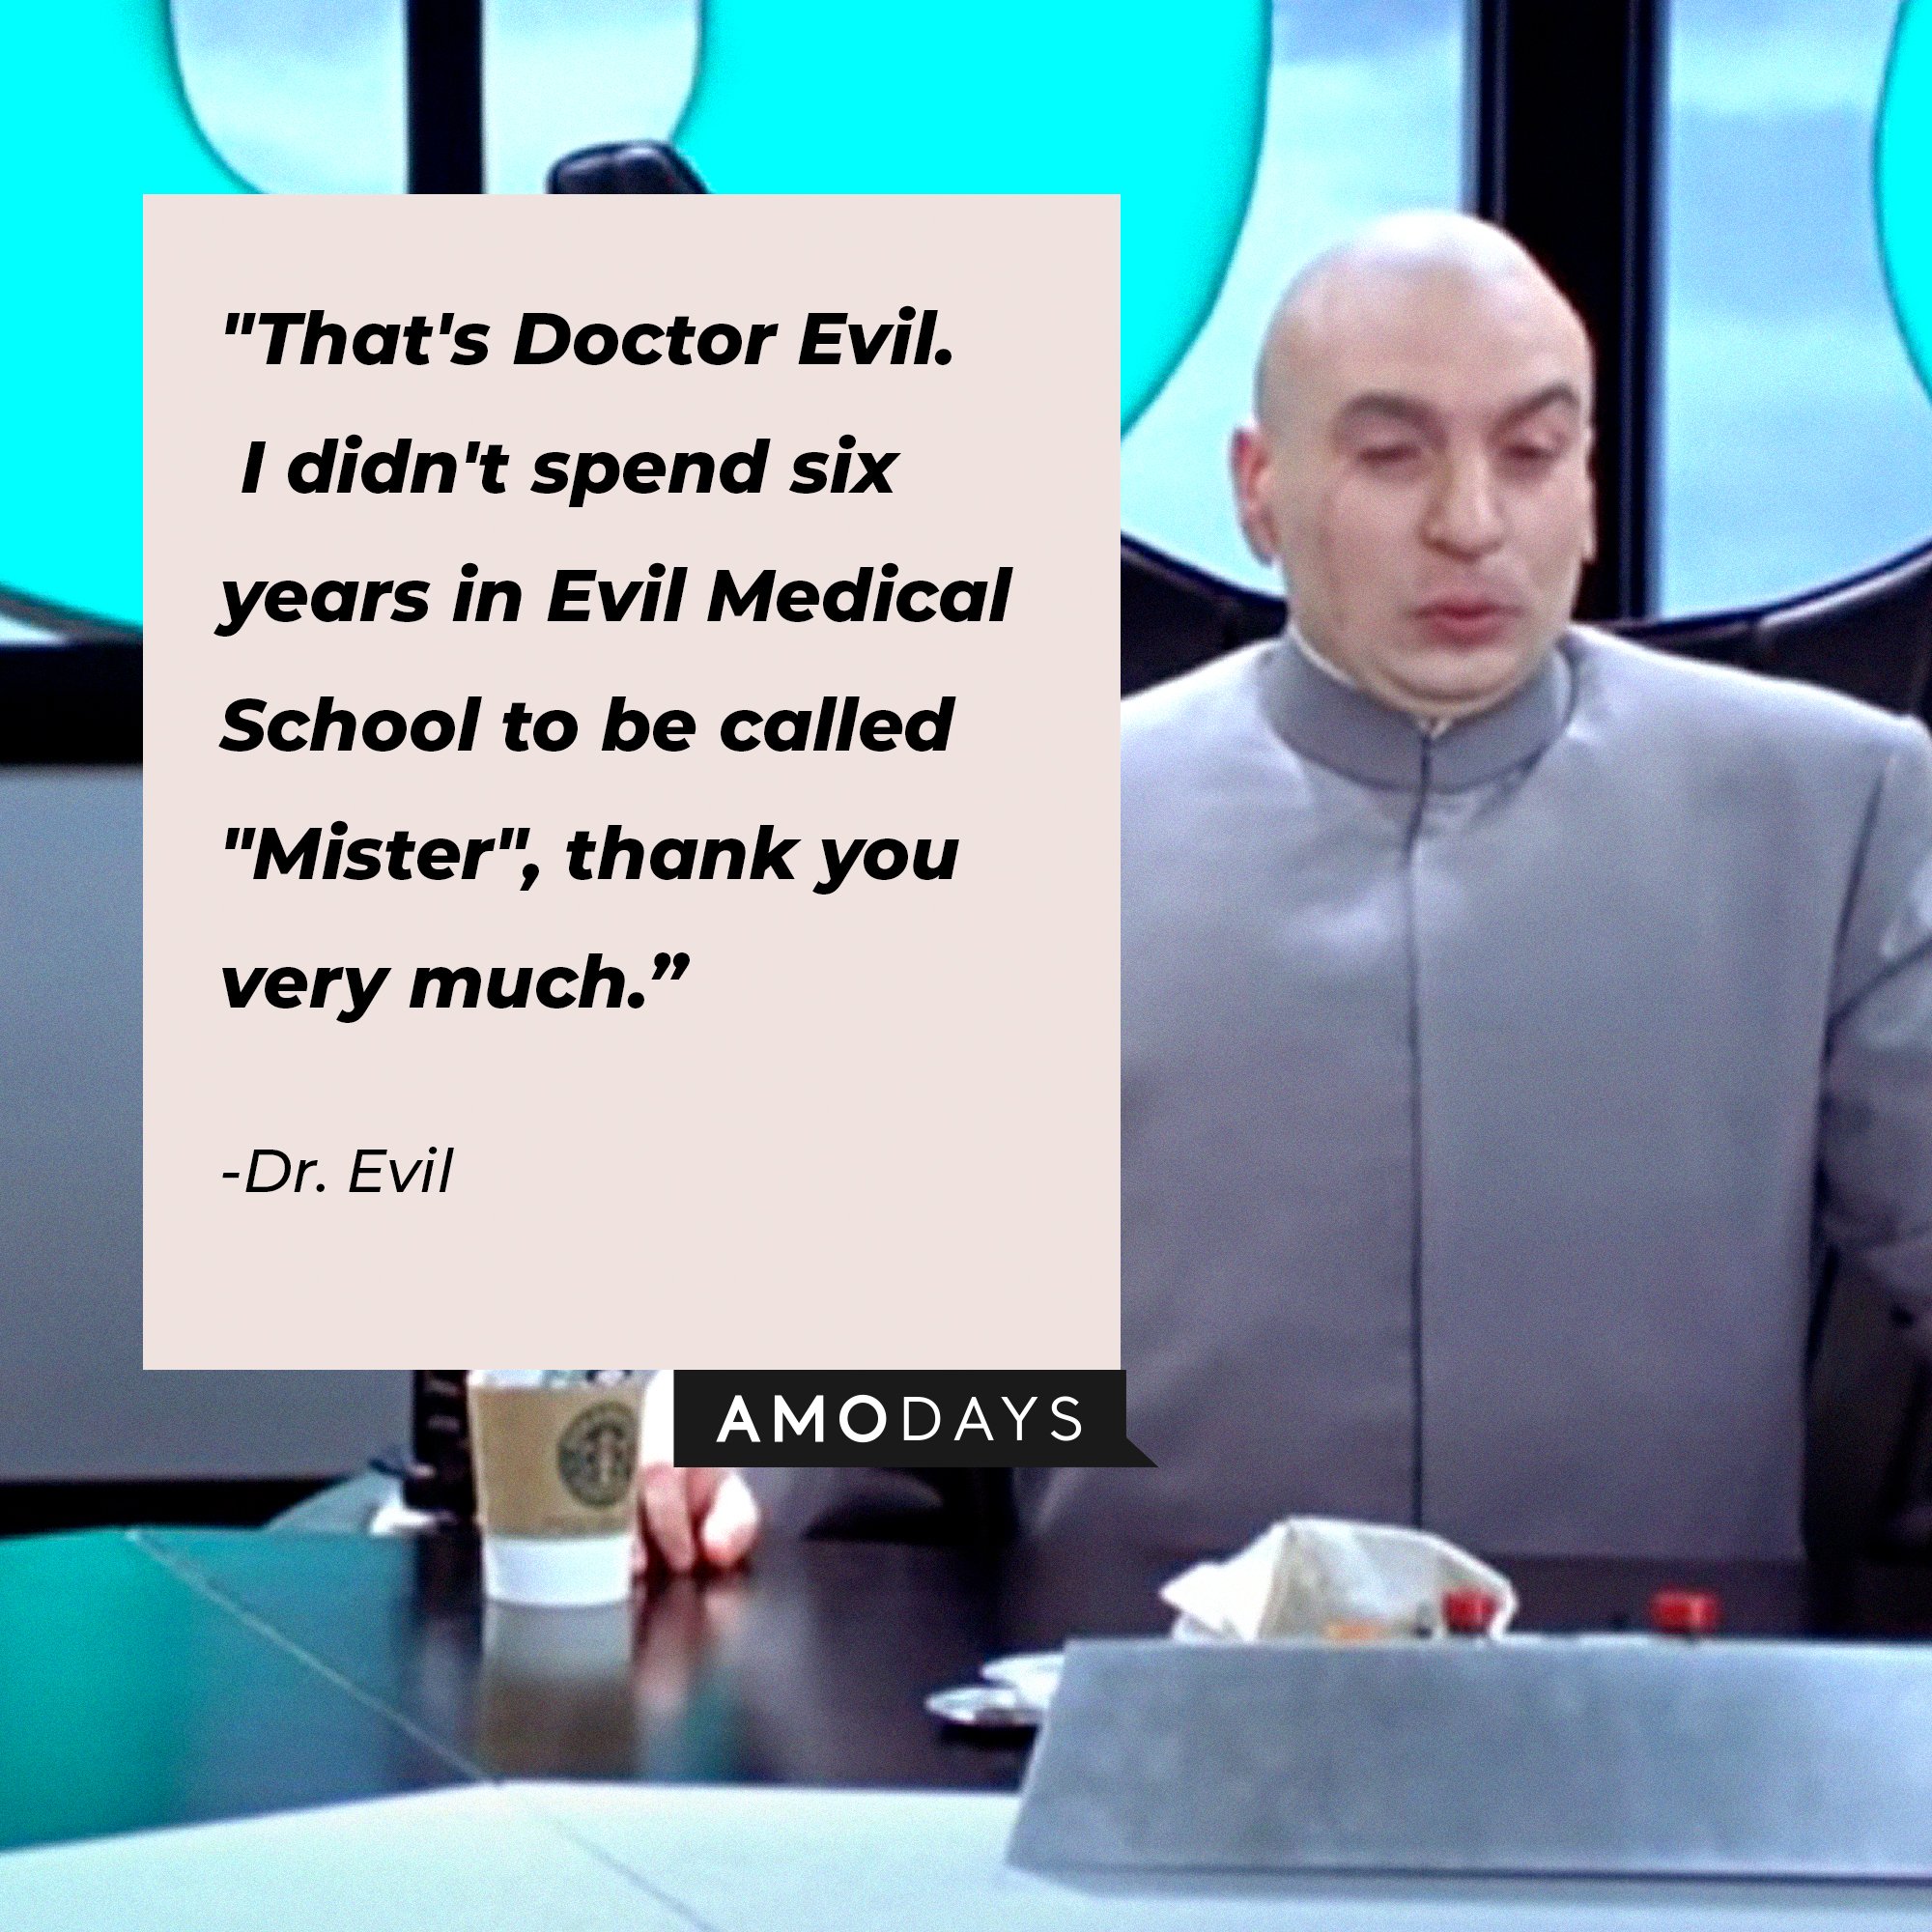  Dr. Evil’s quote: "That's Doctor Evil. I didn't spend six years in Evil Medical School to be called 'Mister,' thank you very much." | Image: Amodays